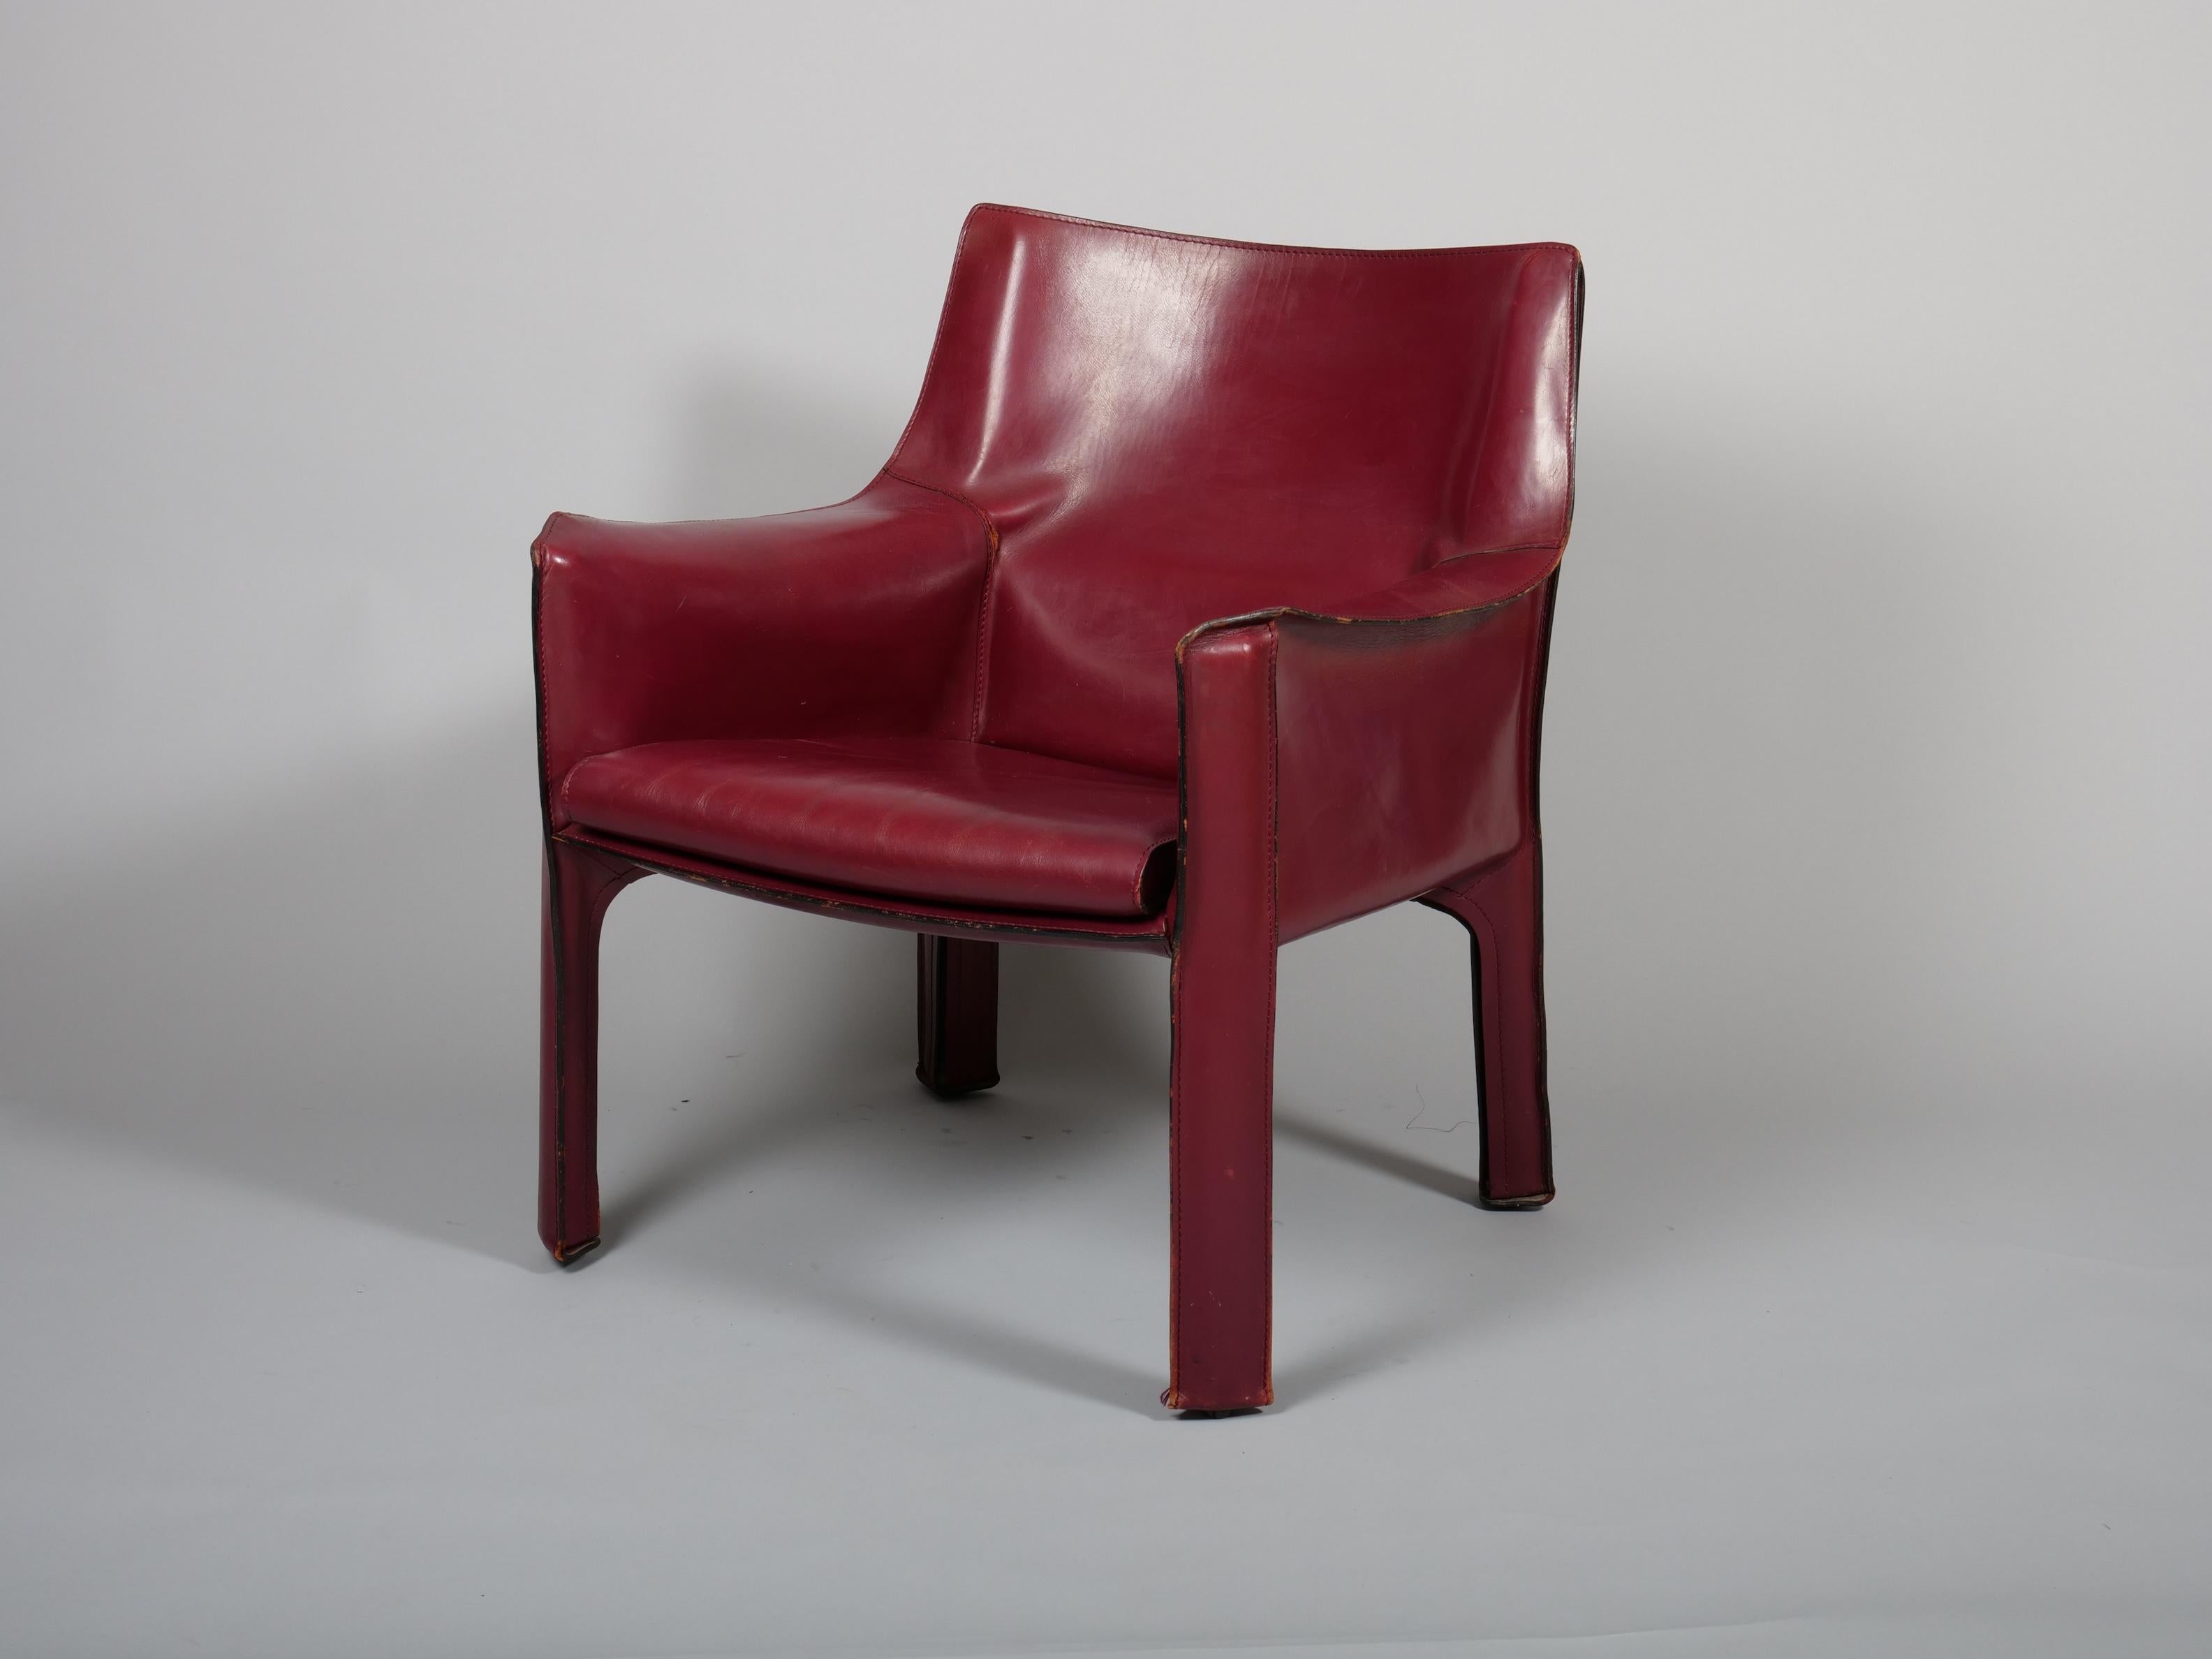 Steel Pair Mario Bellini China Red Leather Cab Chairs, Model 414 for Cassina Italy